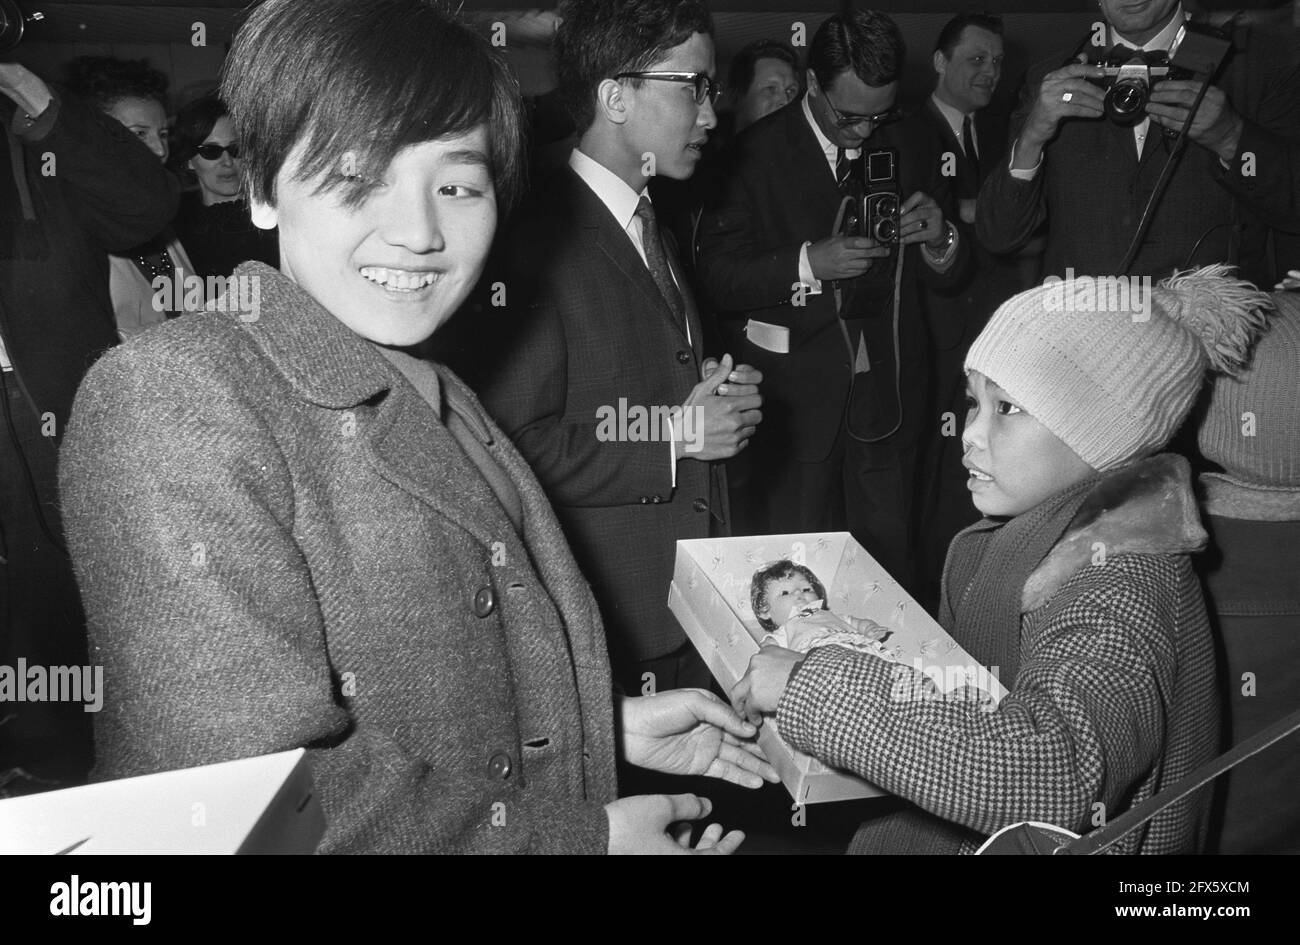 Arrival of Vietnamese children at Schiphol Airport. Troung Phai Anh Dao gives Le Thi Trai a doll on arrival, December 20, 1967, Children, Arrivals, The Netherlands, 20th century press agency photo, news to remember, documentary, historic photography 1945-1990, visual stories, human history of the Twentieth Century, capturing moments in time Stock Photo